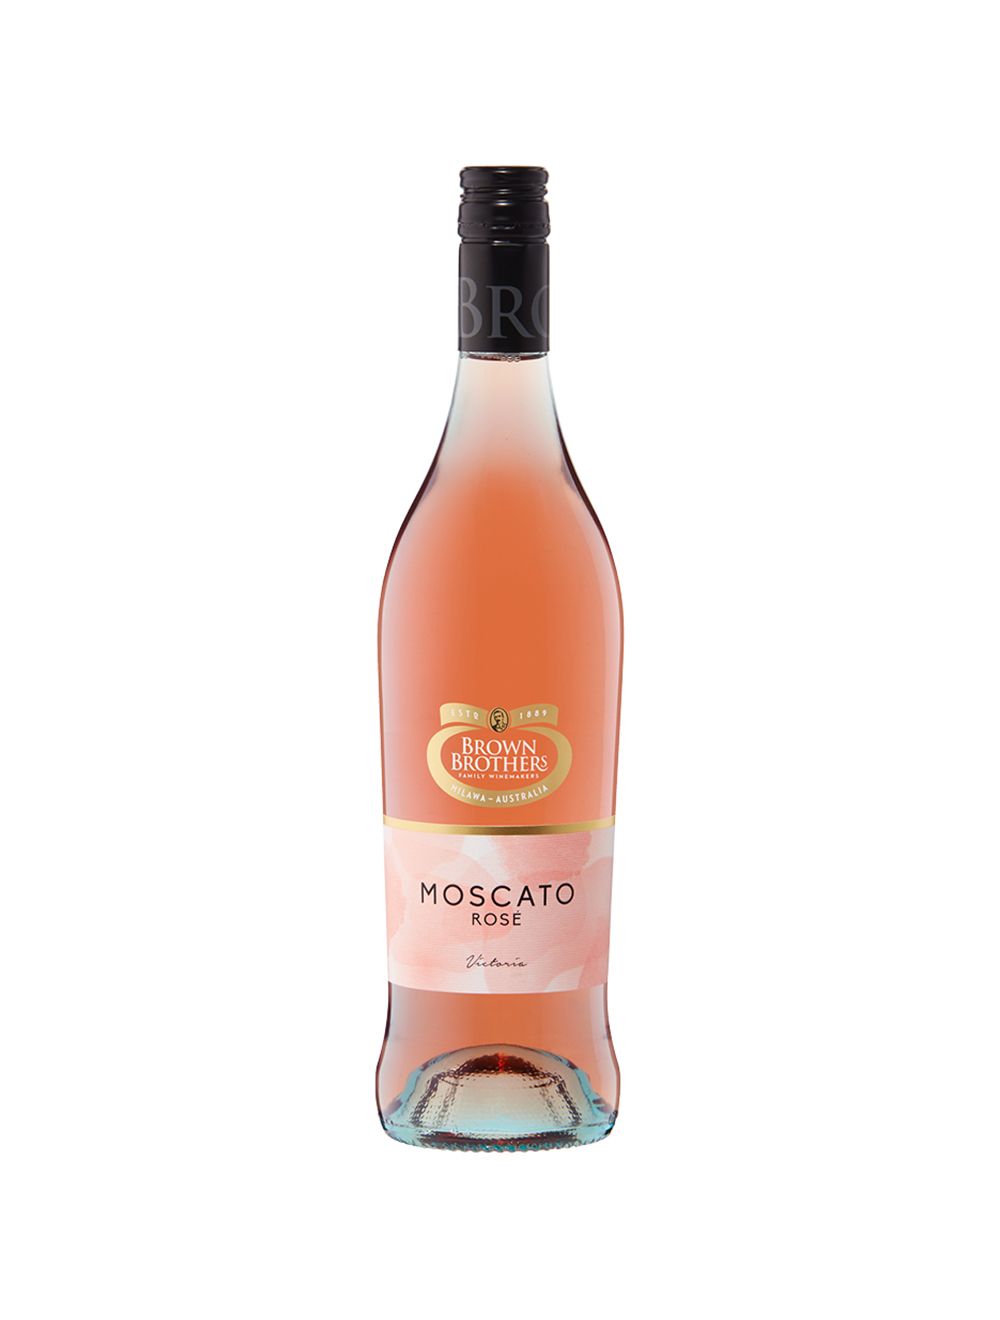 Brown Brothers Moscato Rose 750mL (Case of 6) MyBottleShop